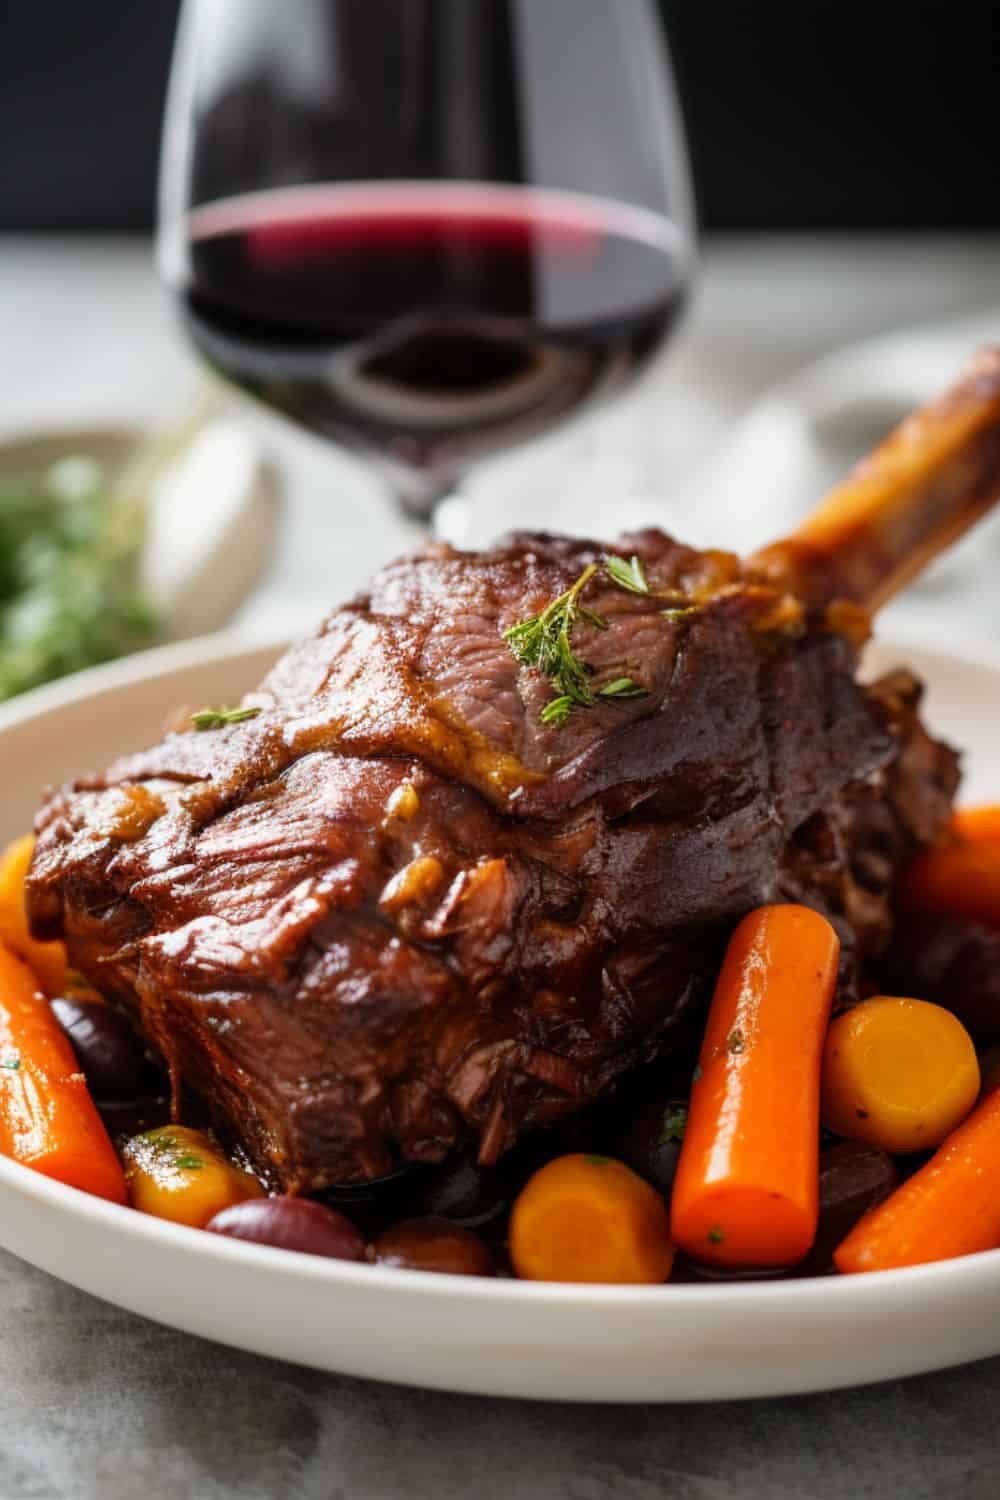 A delectable red wine-infused lamb shank pot roast, simmered to perfection, offering a savory and indulgent dining experience.